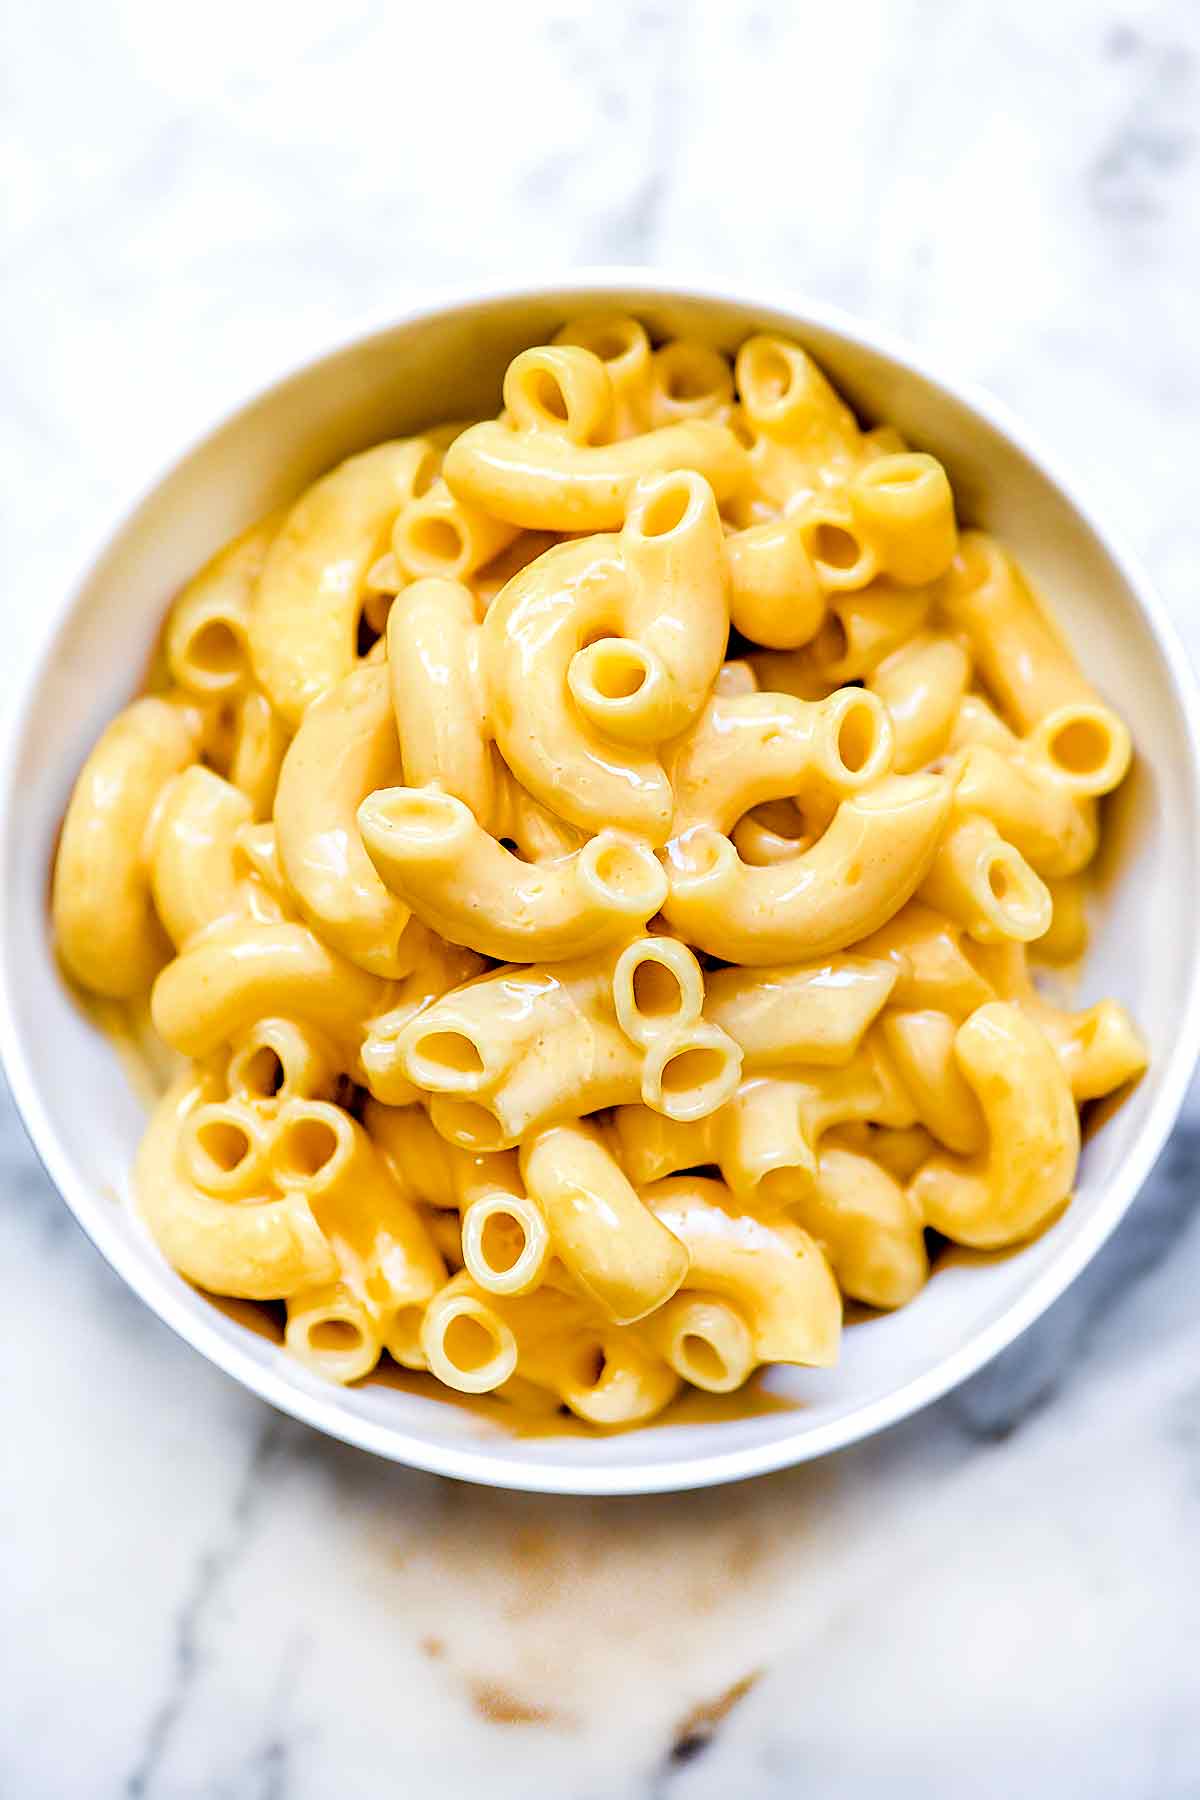 can you use american cheese for macaroni and cheese